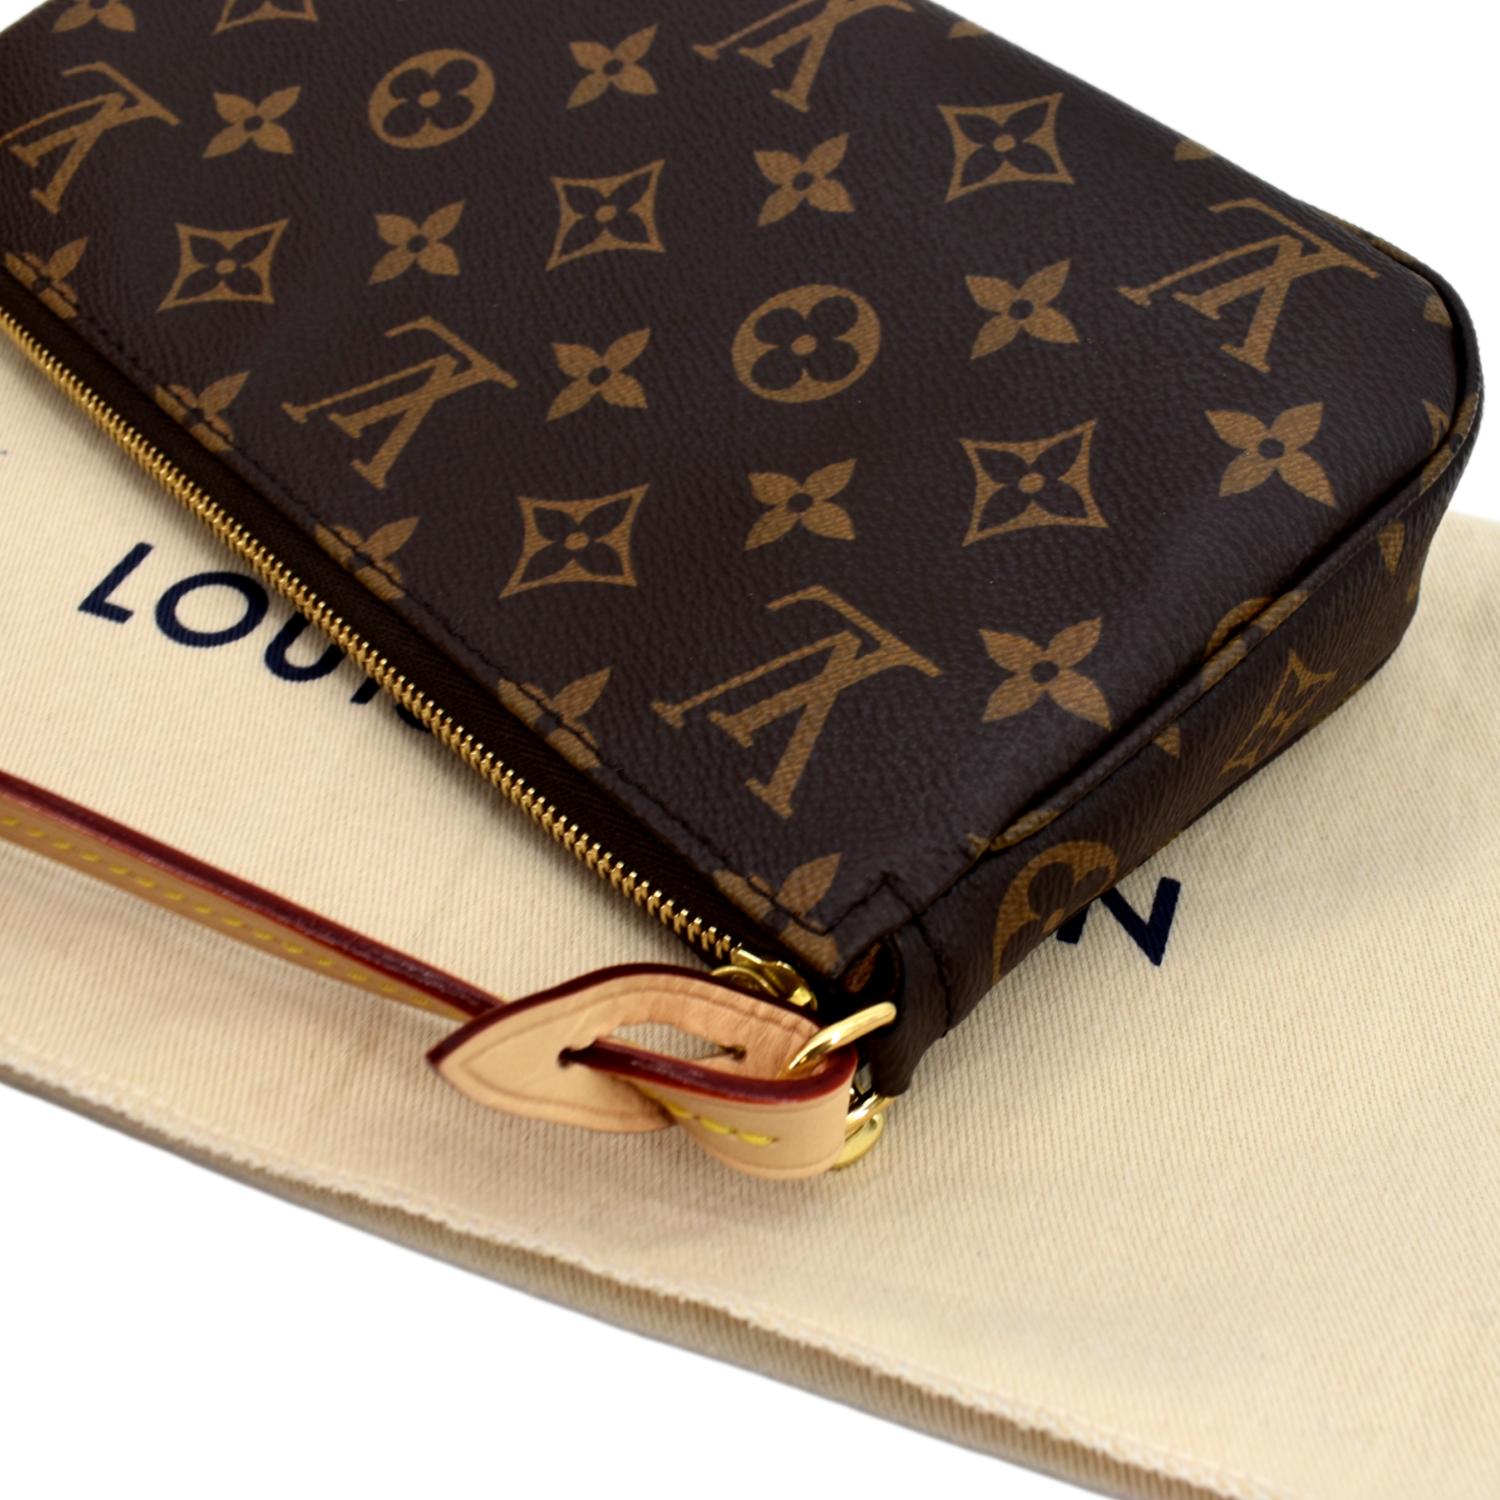 Pochette Accessoires Monogram Canvas - Wallets and Small Leather Goods